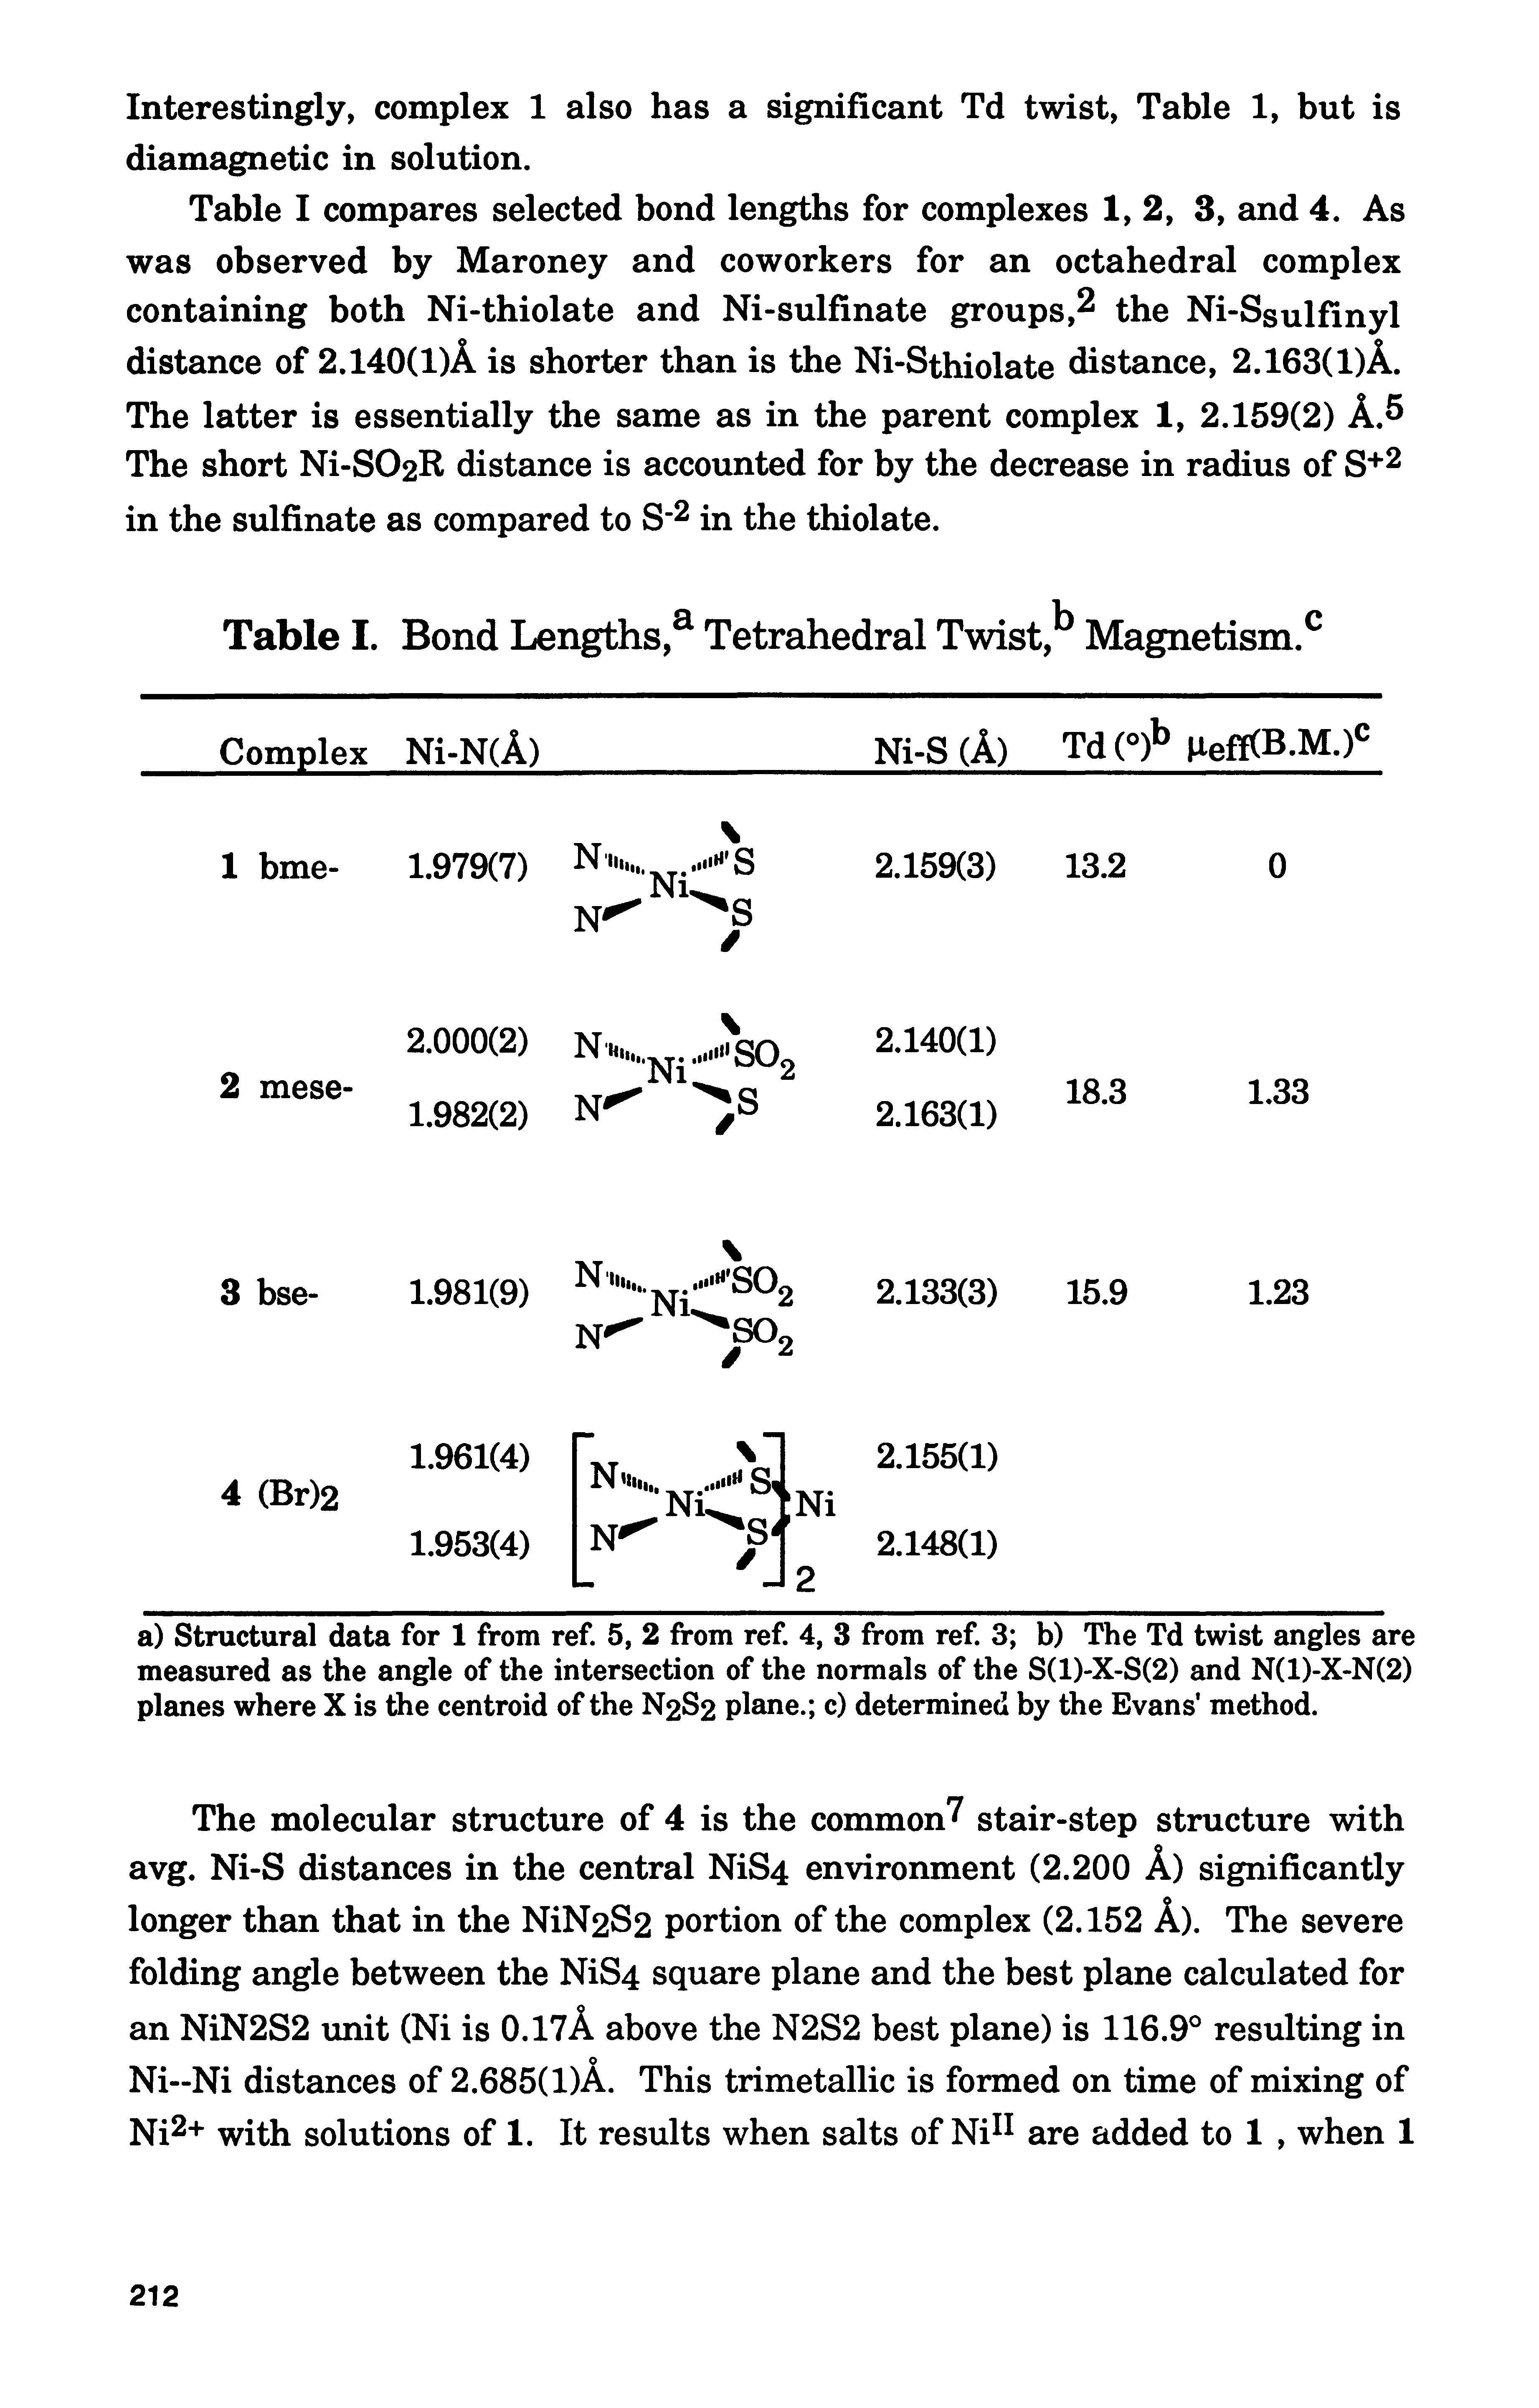 Table I compares selected bond lengths for complexes 1, 2, 3, and 4. As was observed by Maroney and coworkers for an octahedral complex containing both Ni-thiolate and Ni-sulfinate groups, the Ni-Ssulfinyl distance of 2.140(1)A is shorter than is the Ni-Sthiolate distance, 2.163(1)A. The latter is essentially the same as in the parent complex 1, 2.159(2) A. The short N1-S02R distance is accounted for by the decrease in radius of S+2 in the sulfinate as compared to S in the thiolate.